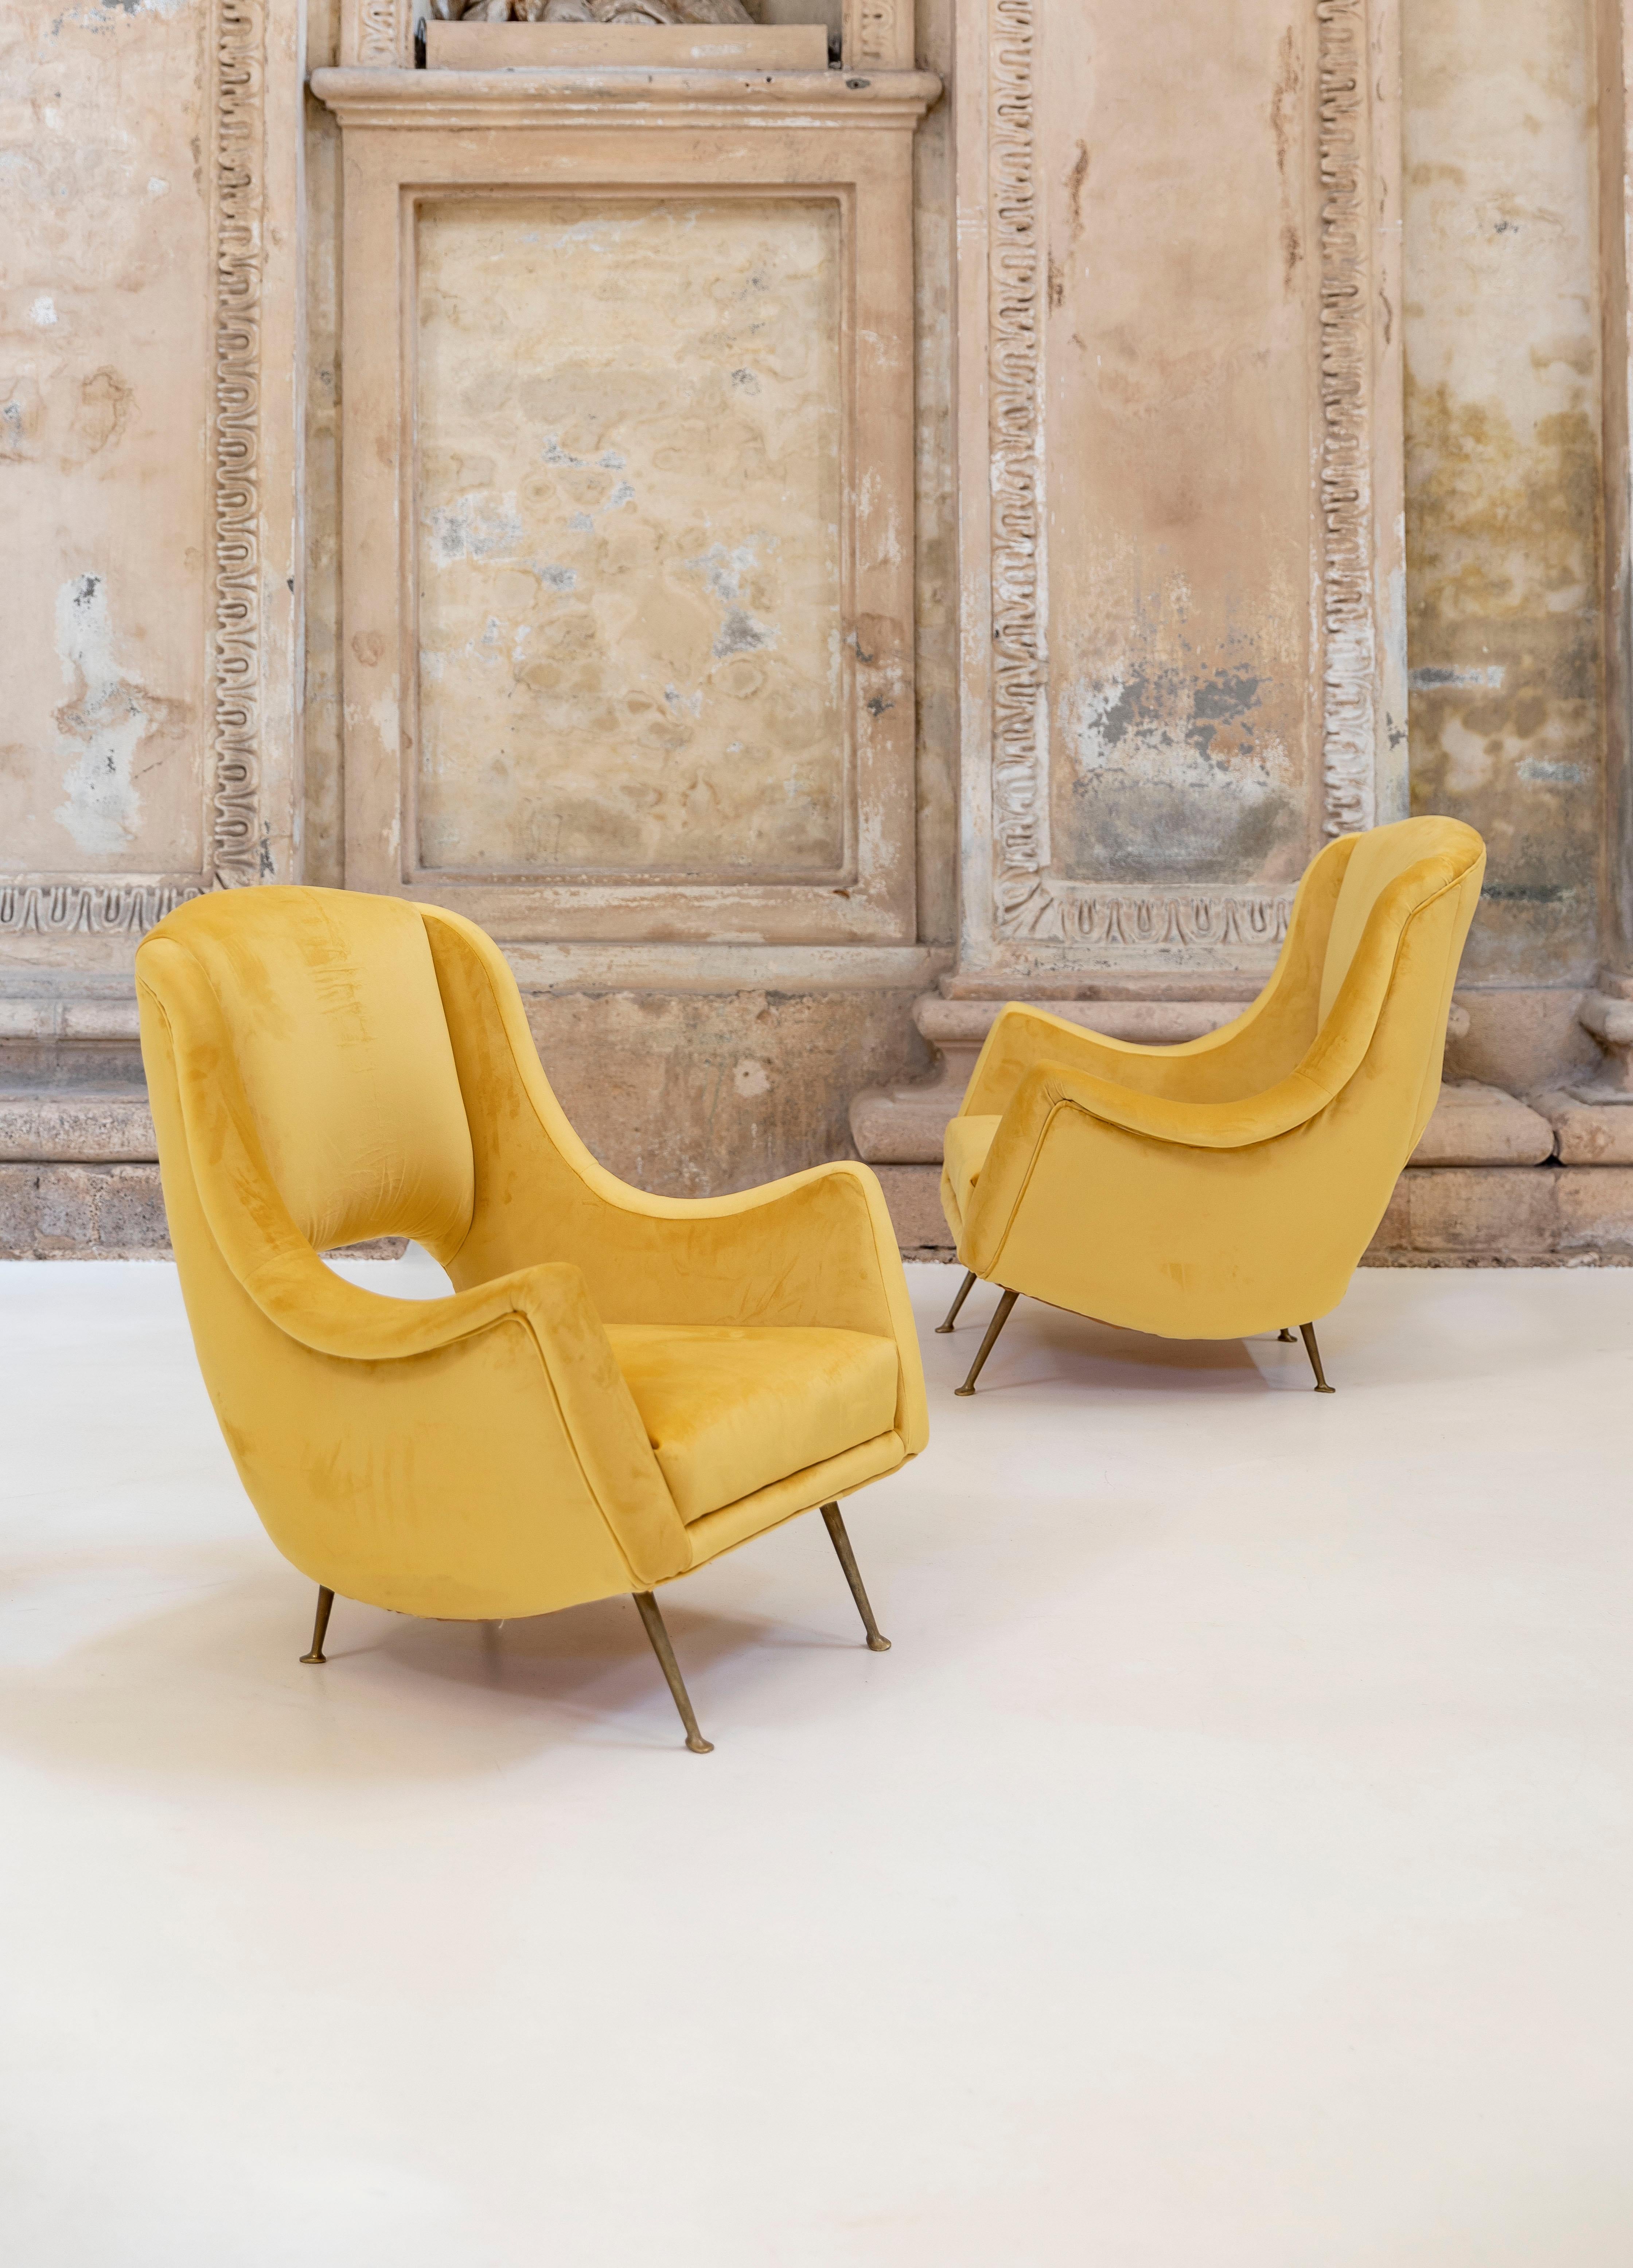 Lovely pair of armchairs attributed to Carlo de Carli.

Solid brass legs and elegant yellow velvet upholstery.

Newly reupholstered.

Shaped and open back seat.